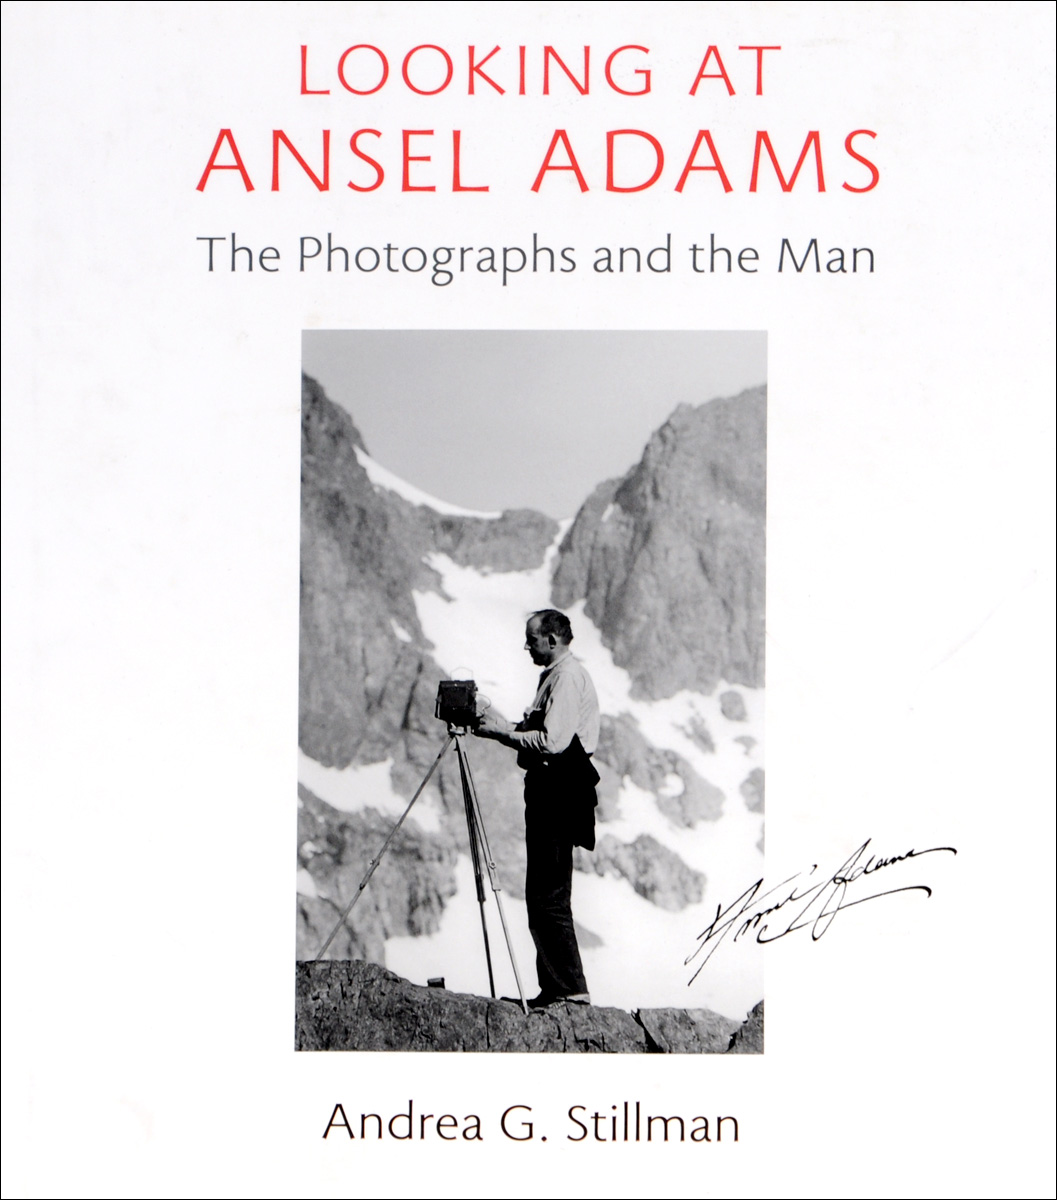 Looking at Ansel Adams: The Photographs and the Man